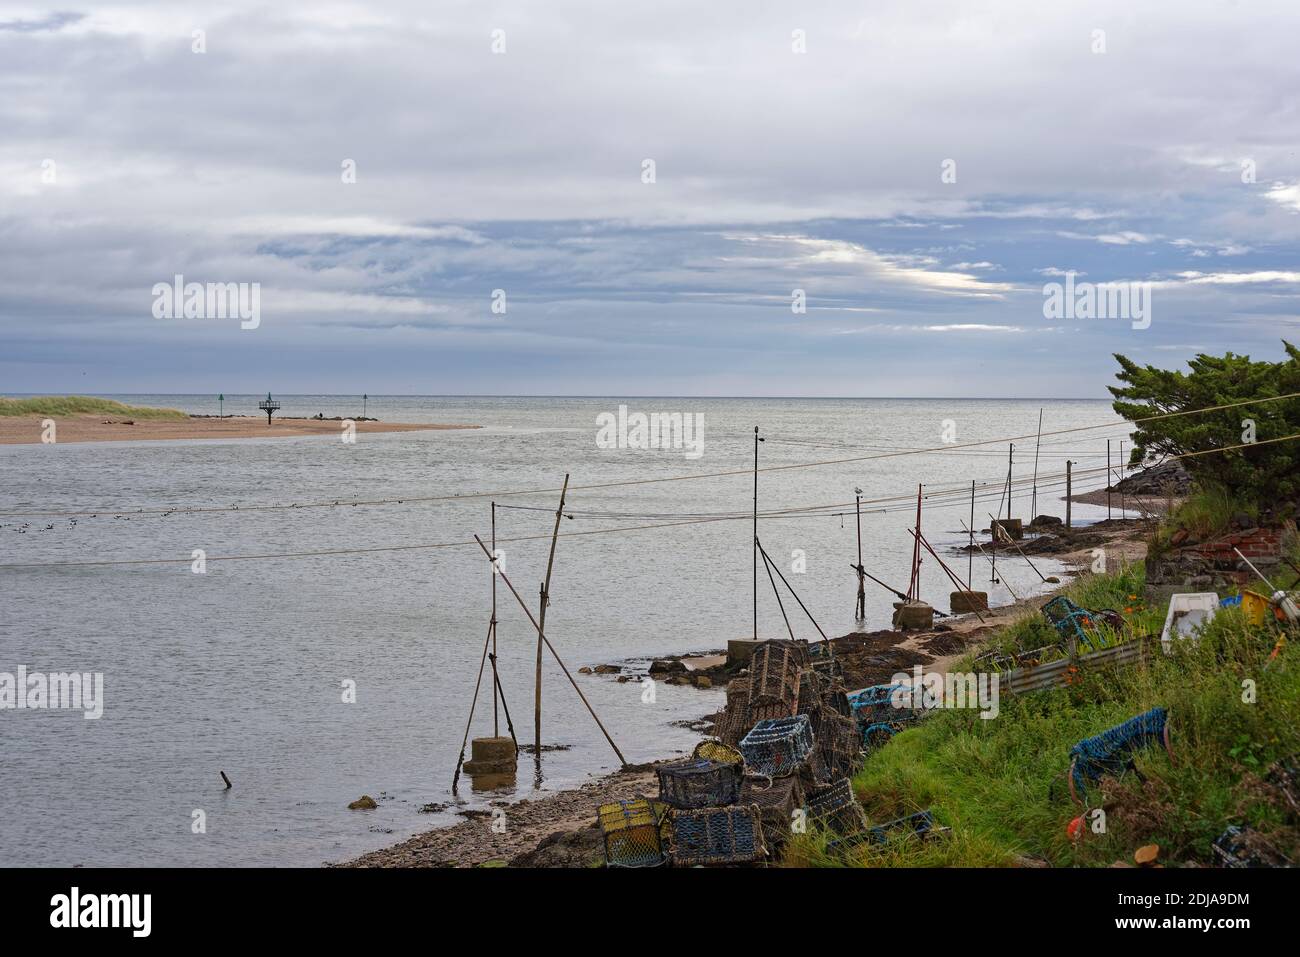 The old traditional Washing Lines of the Fishermans cottages over the beach at Ferryden on the East Coast of Scotland at High Tide. Stock Photo